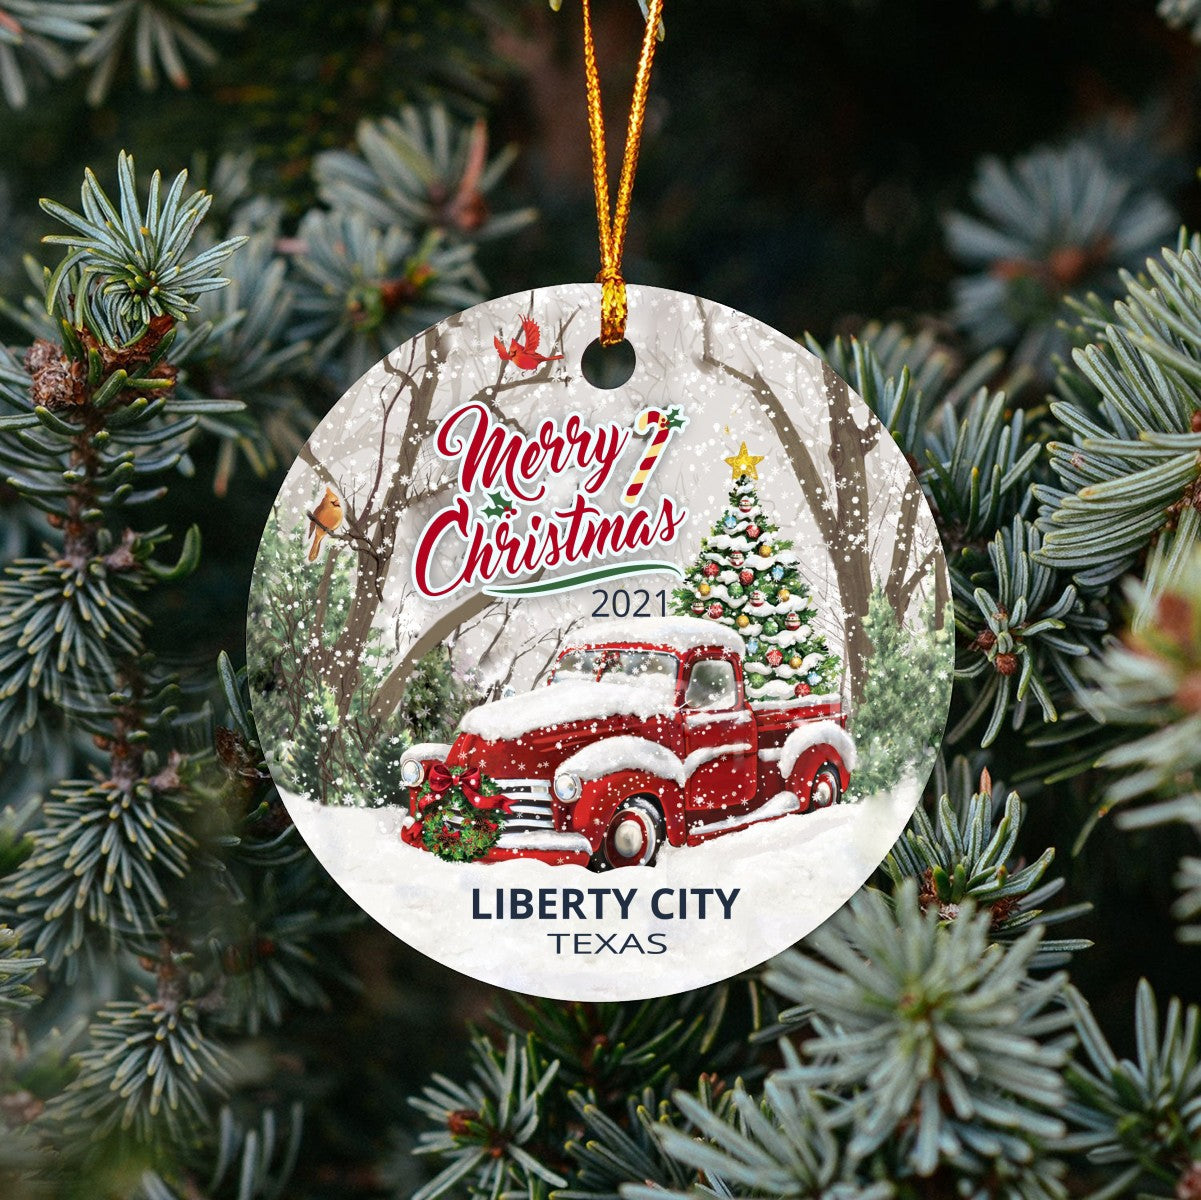 Christmas Tree Ornaments Liberty City - Ornament With Name City, State Liberty City Texas TX Ornament - Red Truck Xmas Ornaments 3'' Plastic Gift For Family, Friend And Housewarming